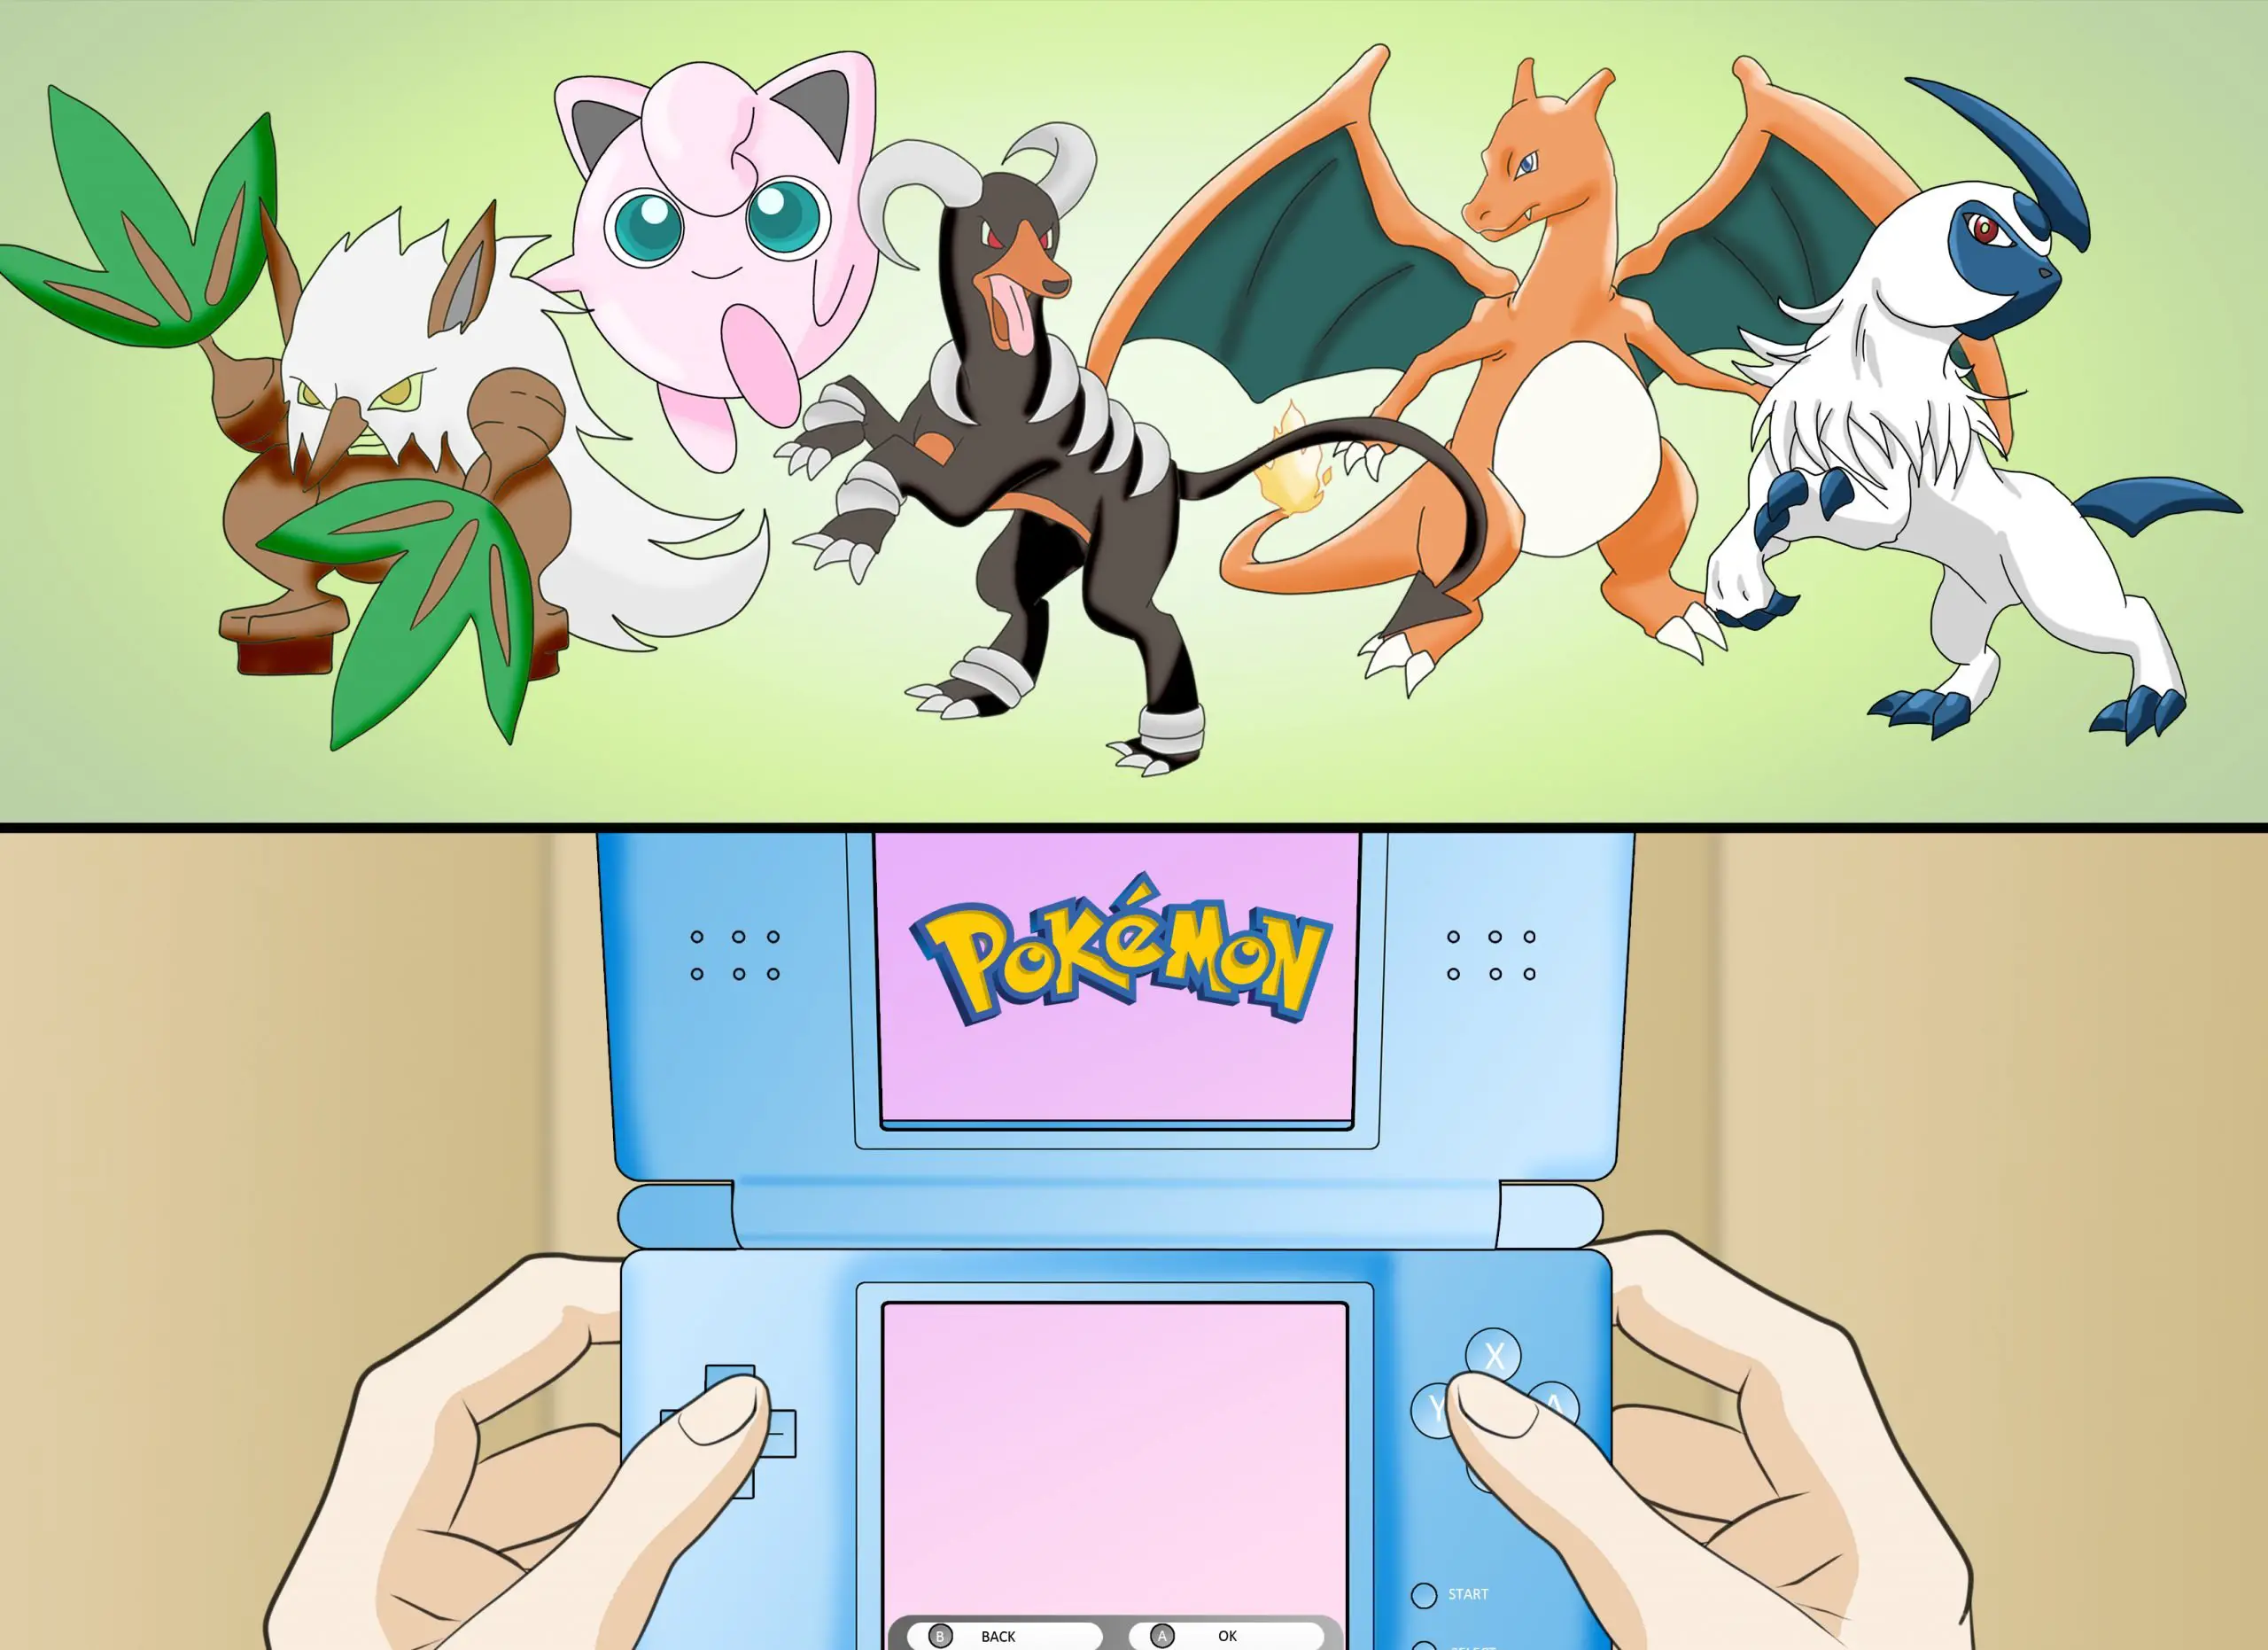 How to Make an Amazing Pokémon Team on Any Game: 7 Steps